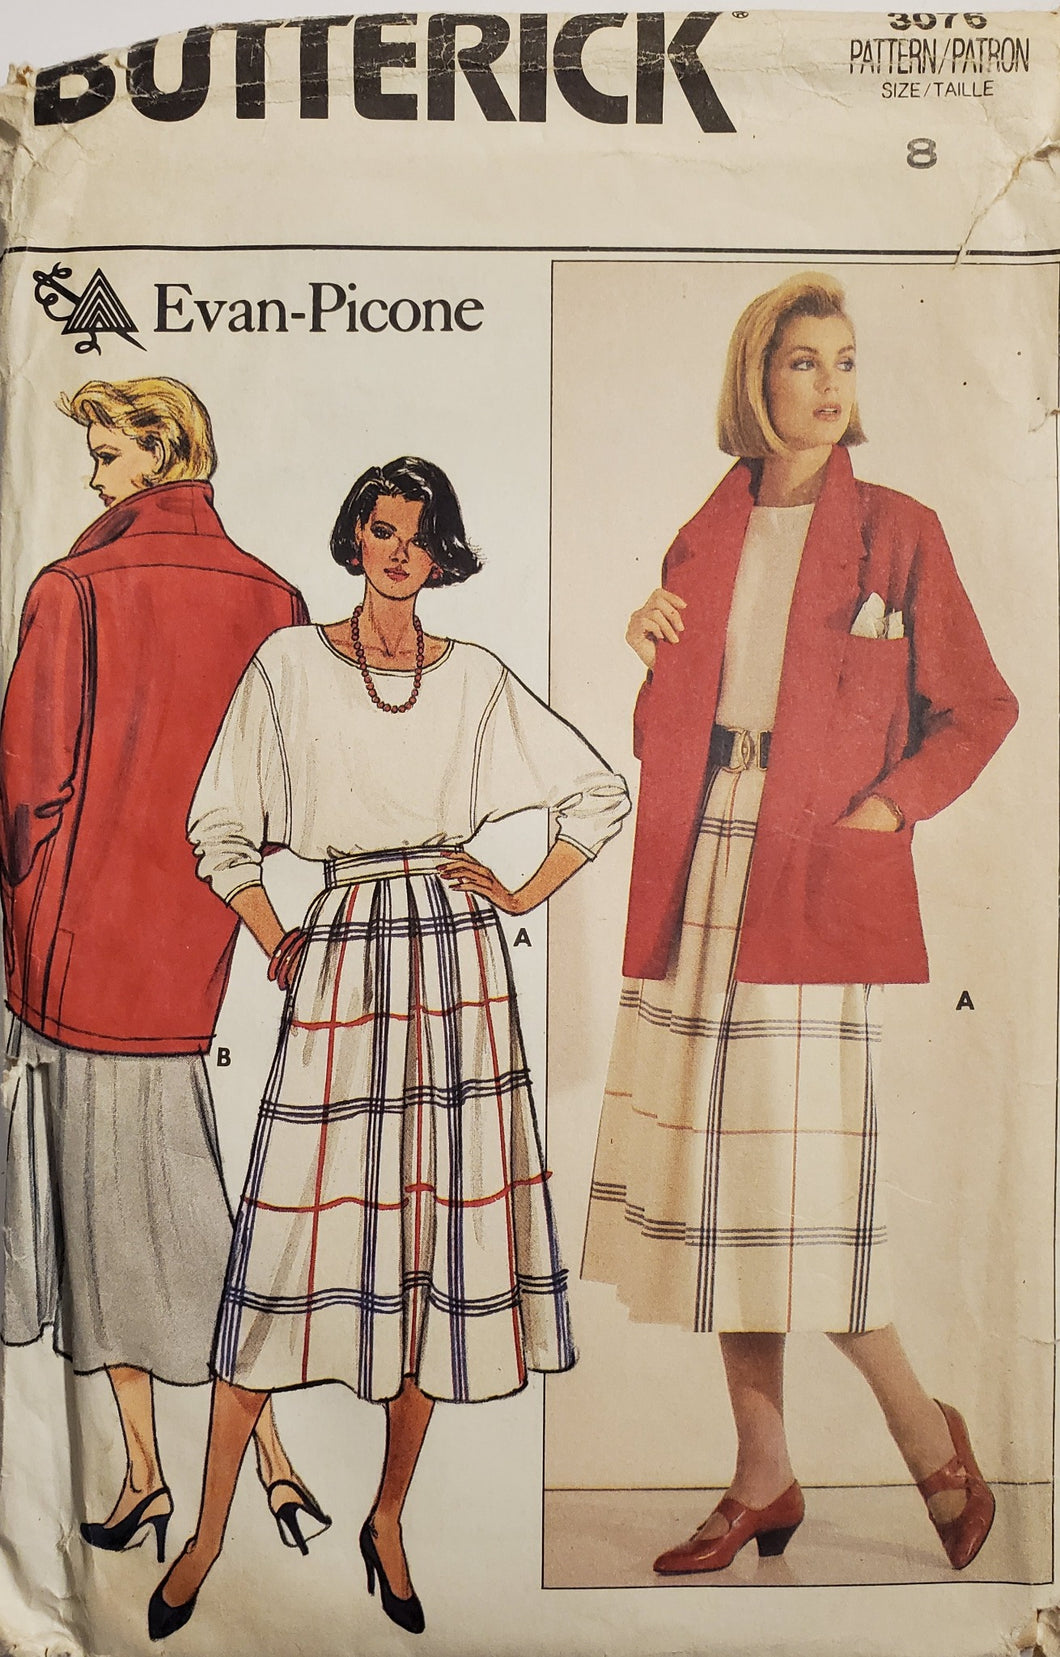 Butterick Pattern 3076, Evan Picone, UNCUT, Jacket, Top and Skirt Size 8, Vintage